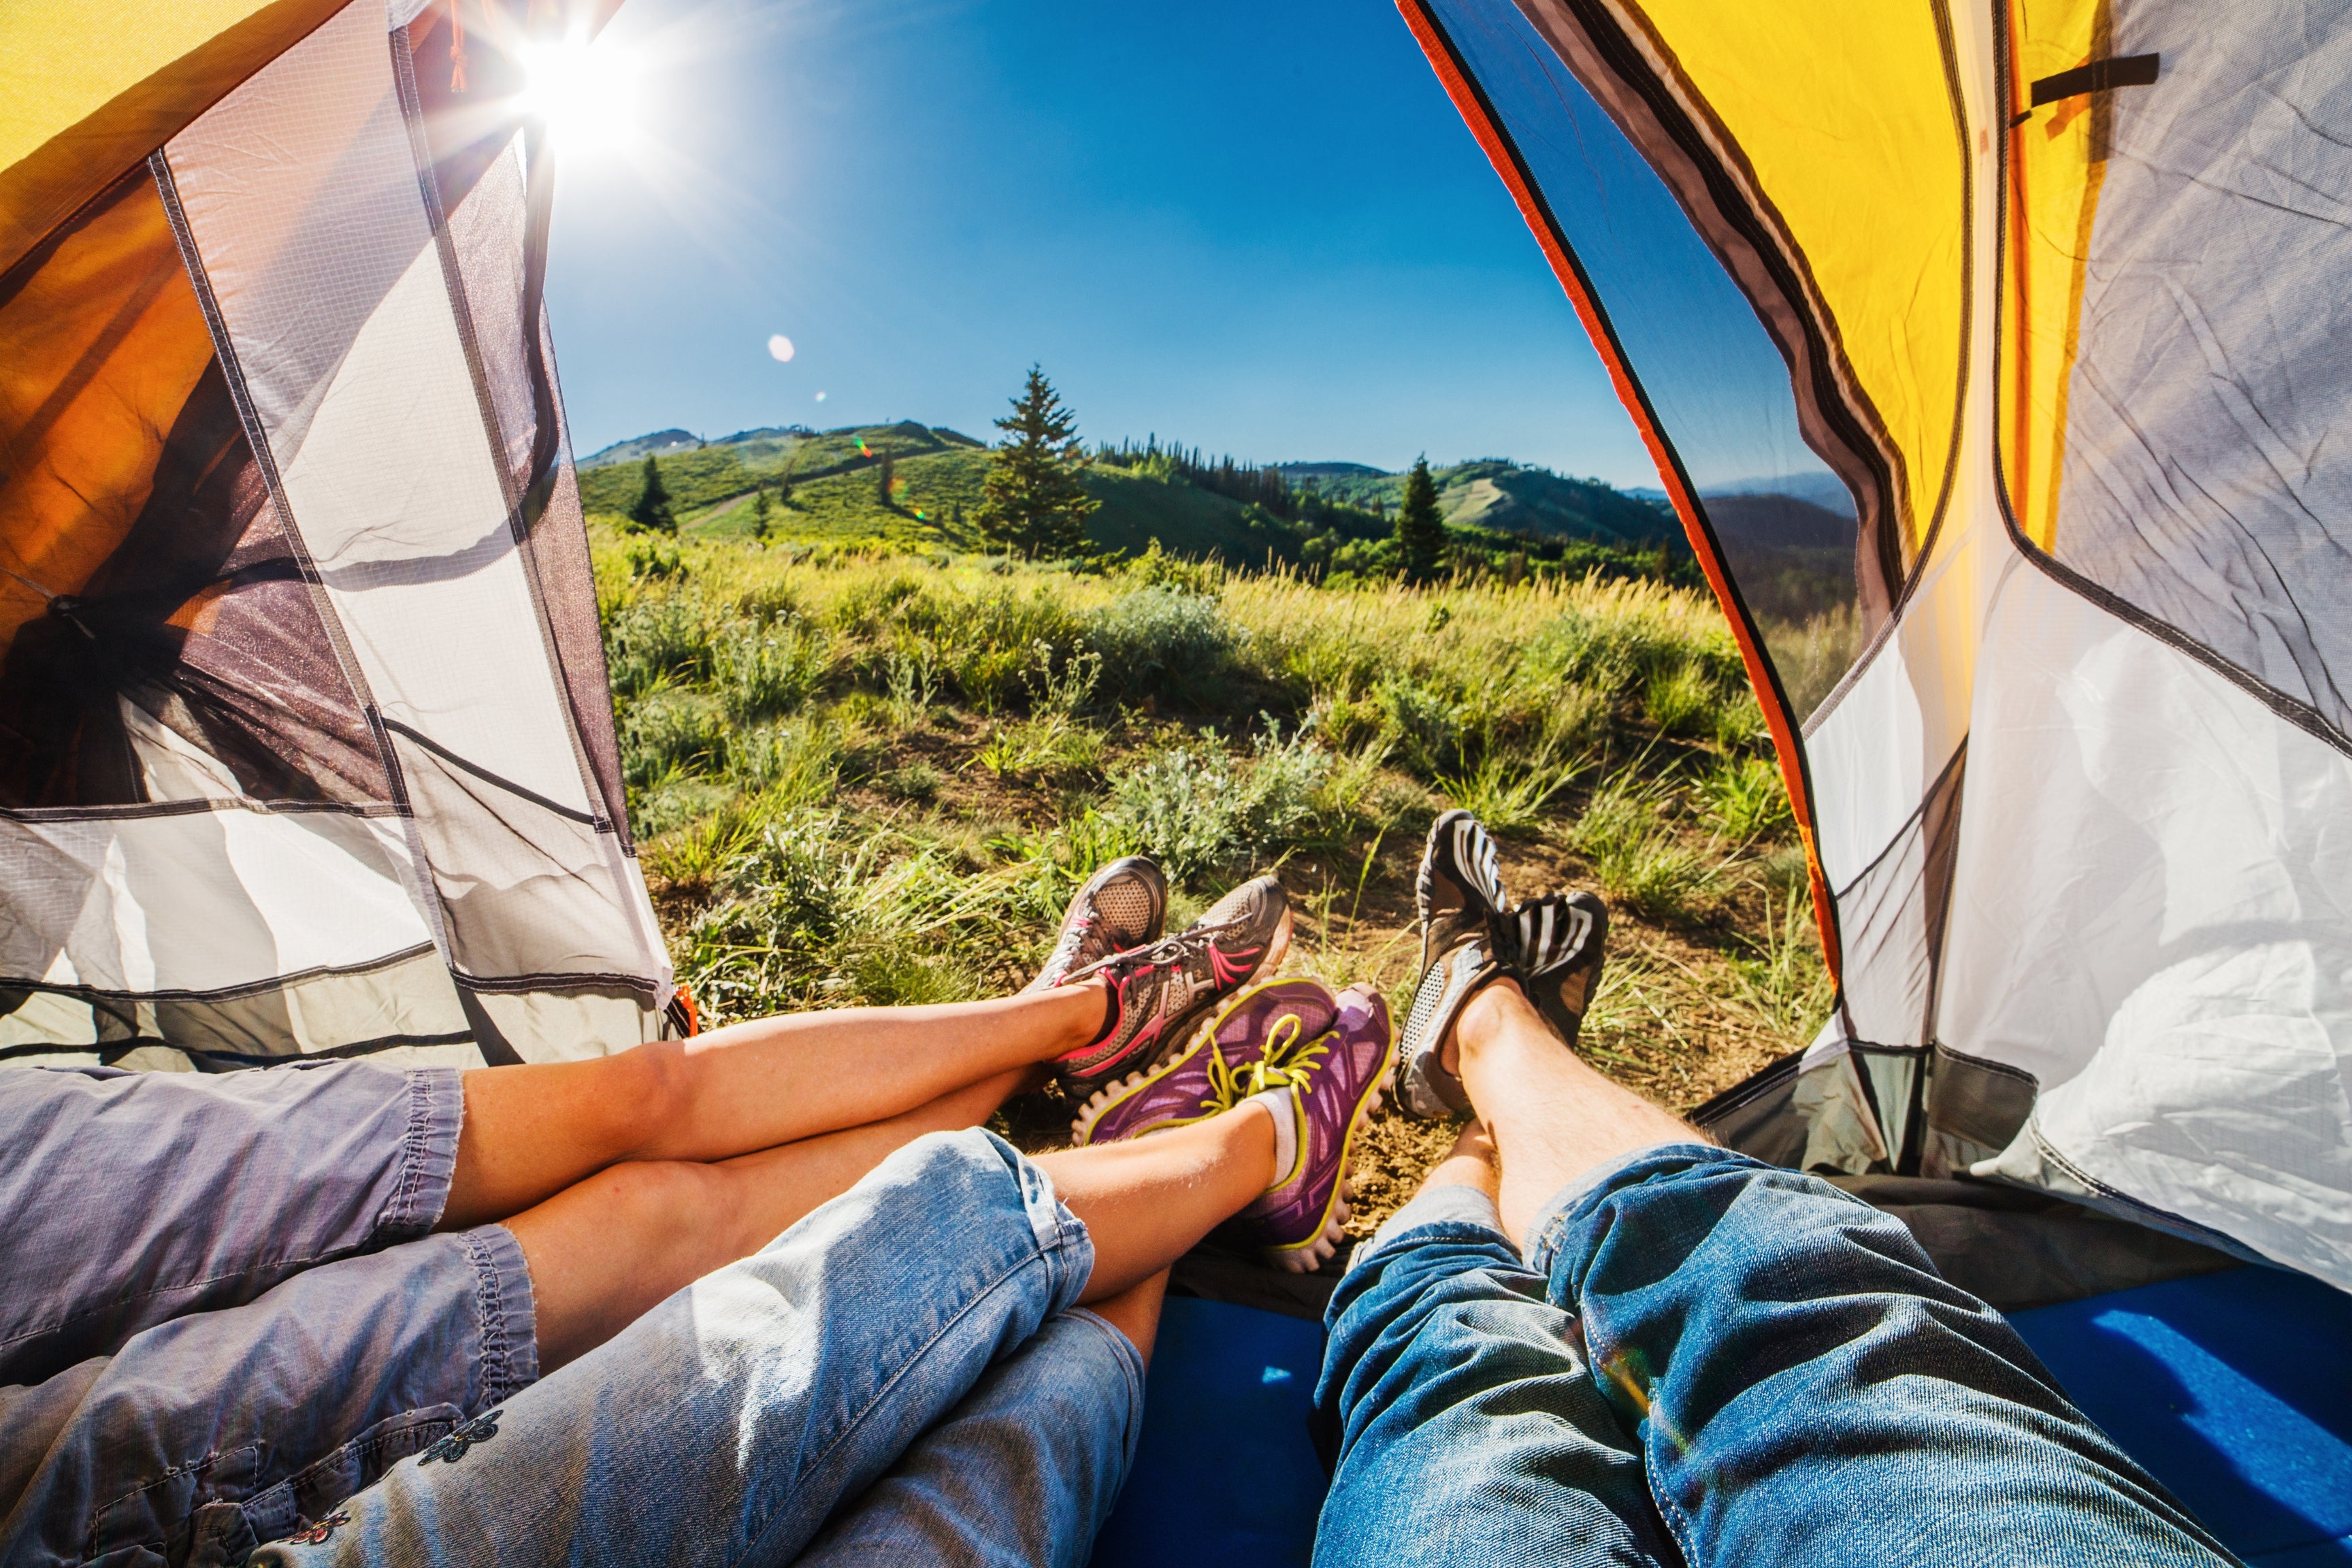 Ultimate Camping Packing List